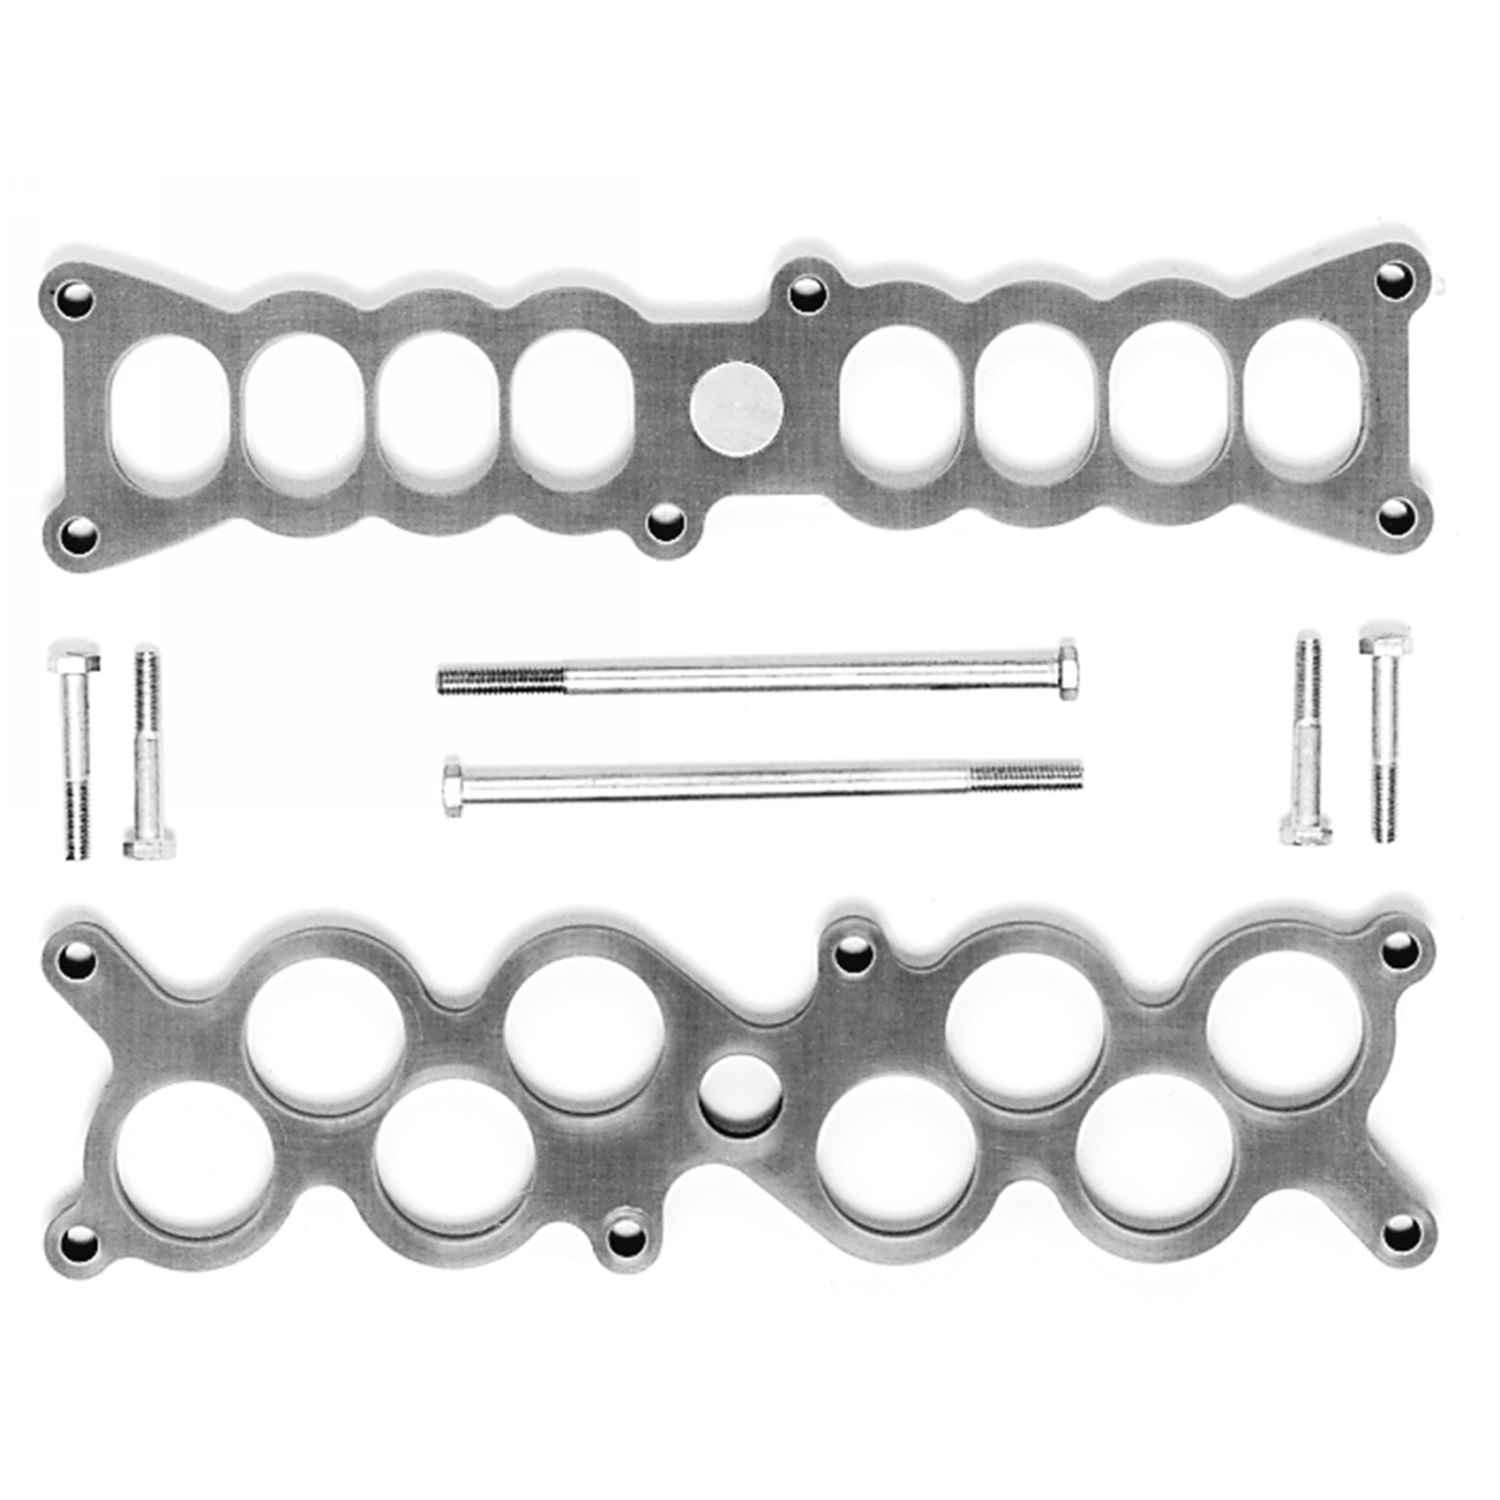 Ford Racing Ford Racing M-9486-A52 Cobra 1/2 in. EFI Intake Heat Spacer Fits 93-95 Mustang